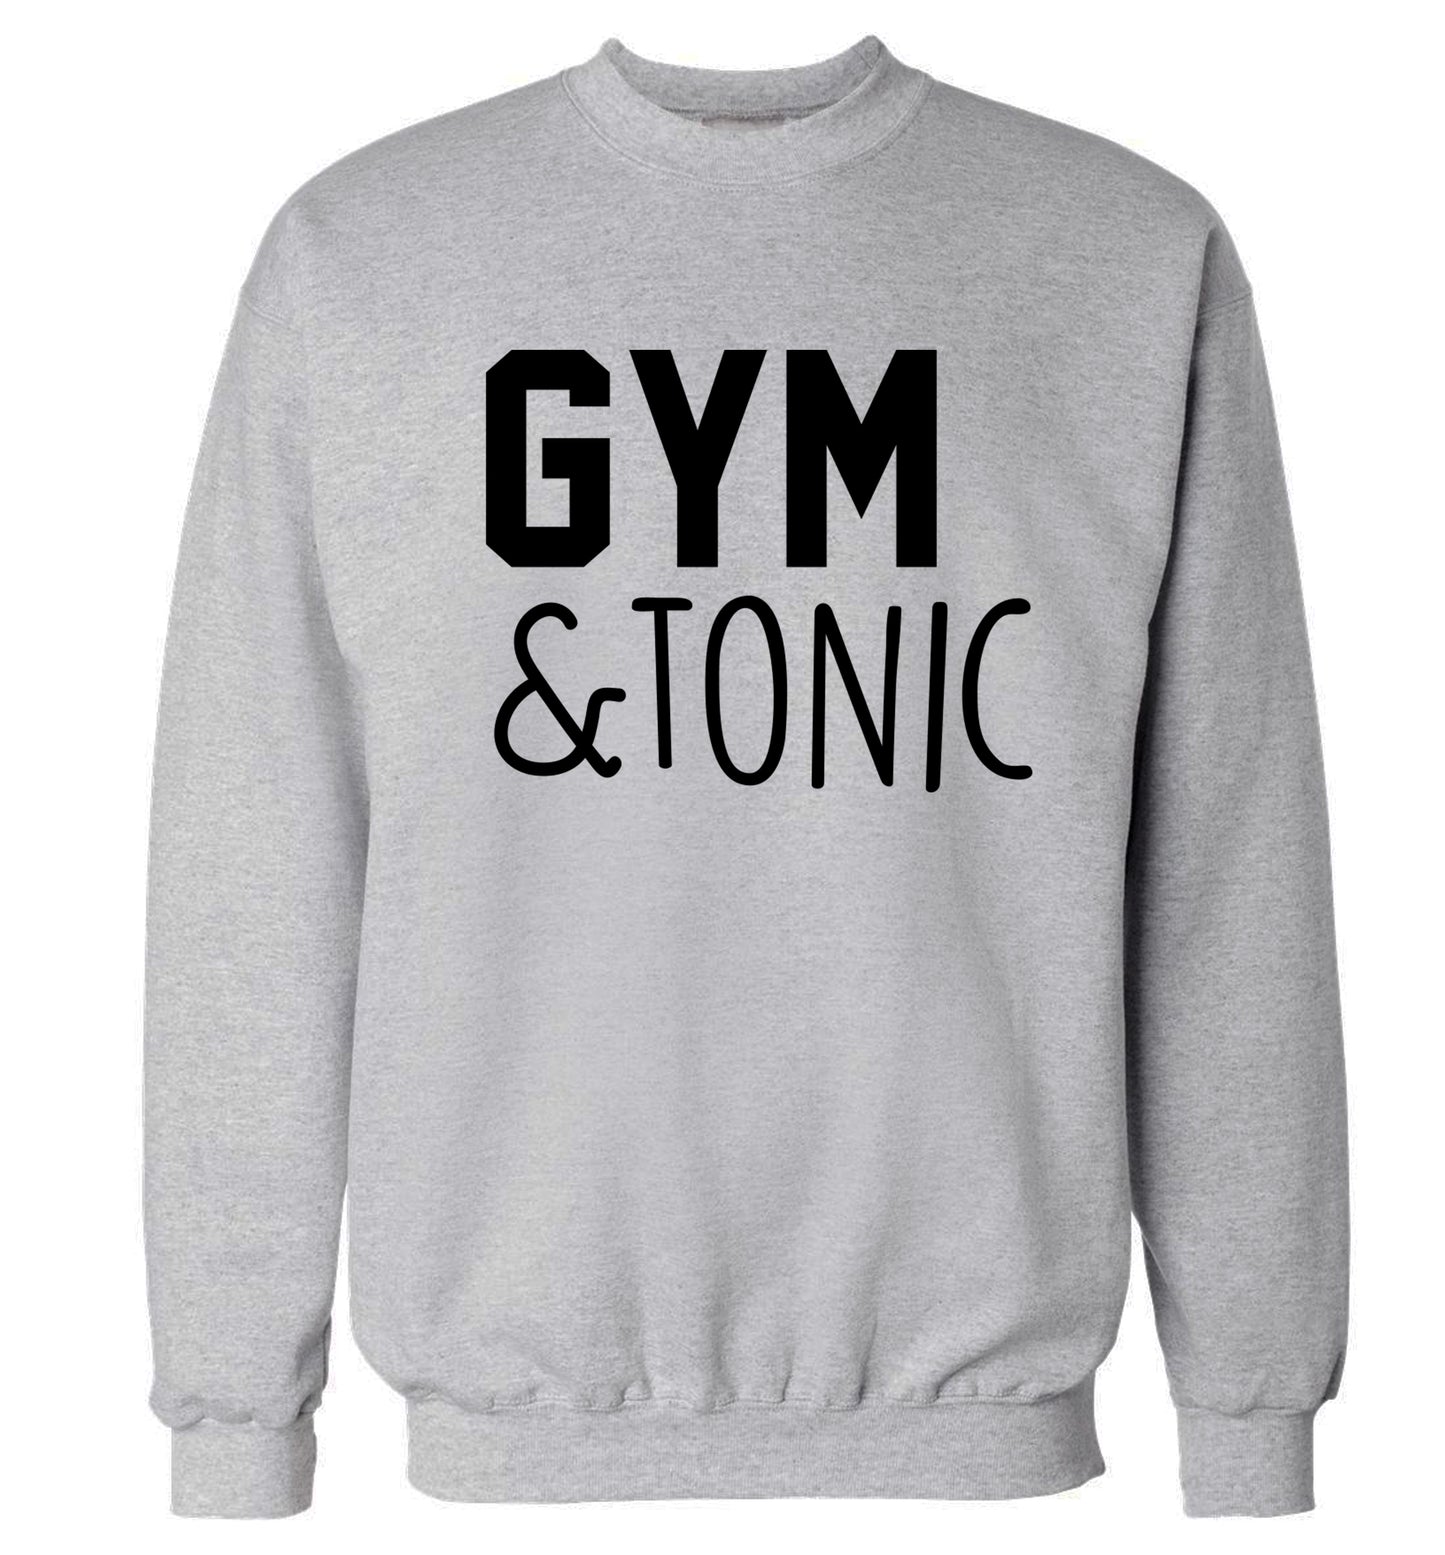 Gym and tonic Adult's unisex grey Sweater 2XL